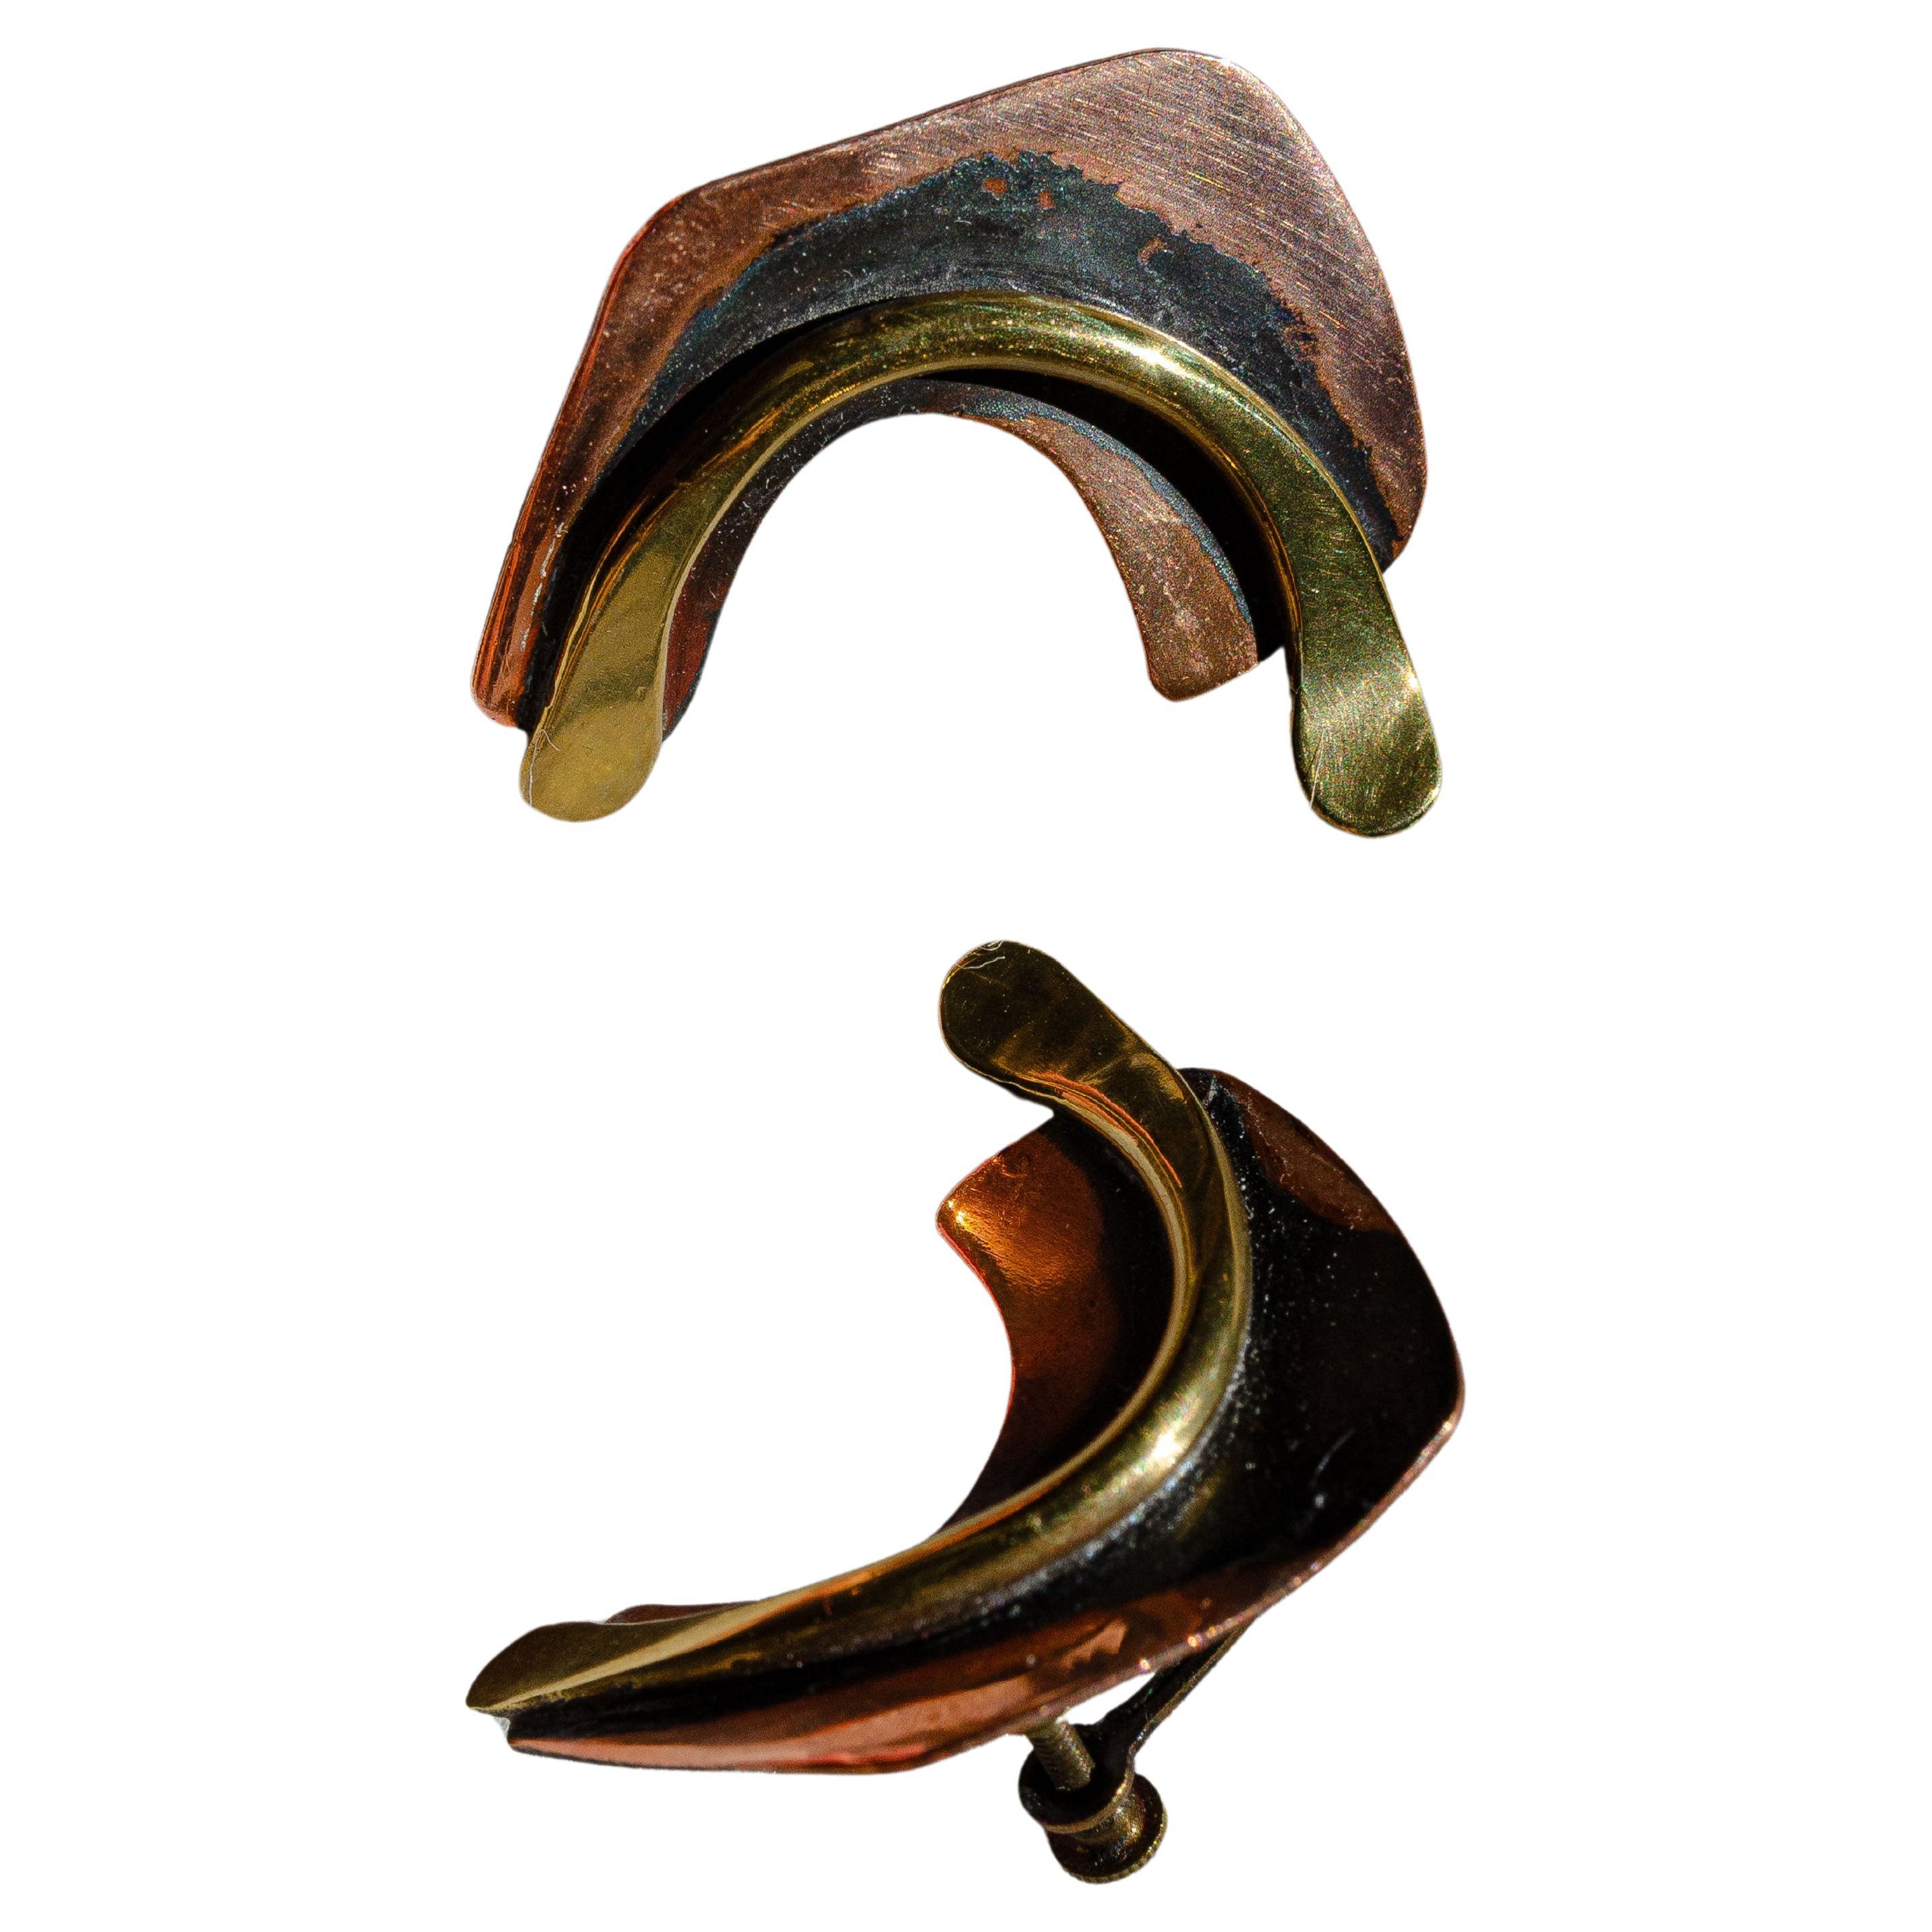 Dynamic Mid-Century Modernist Copper and Brass Biomorphic Earrings By Art Smith For Sale